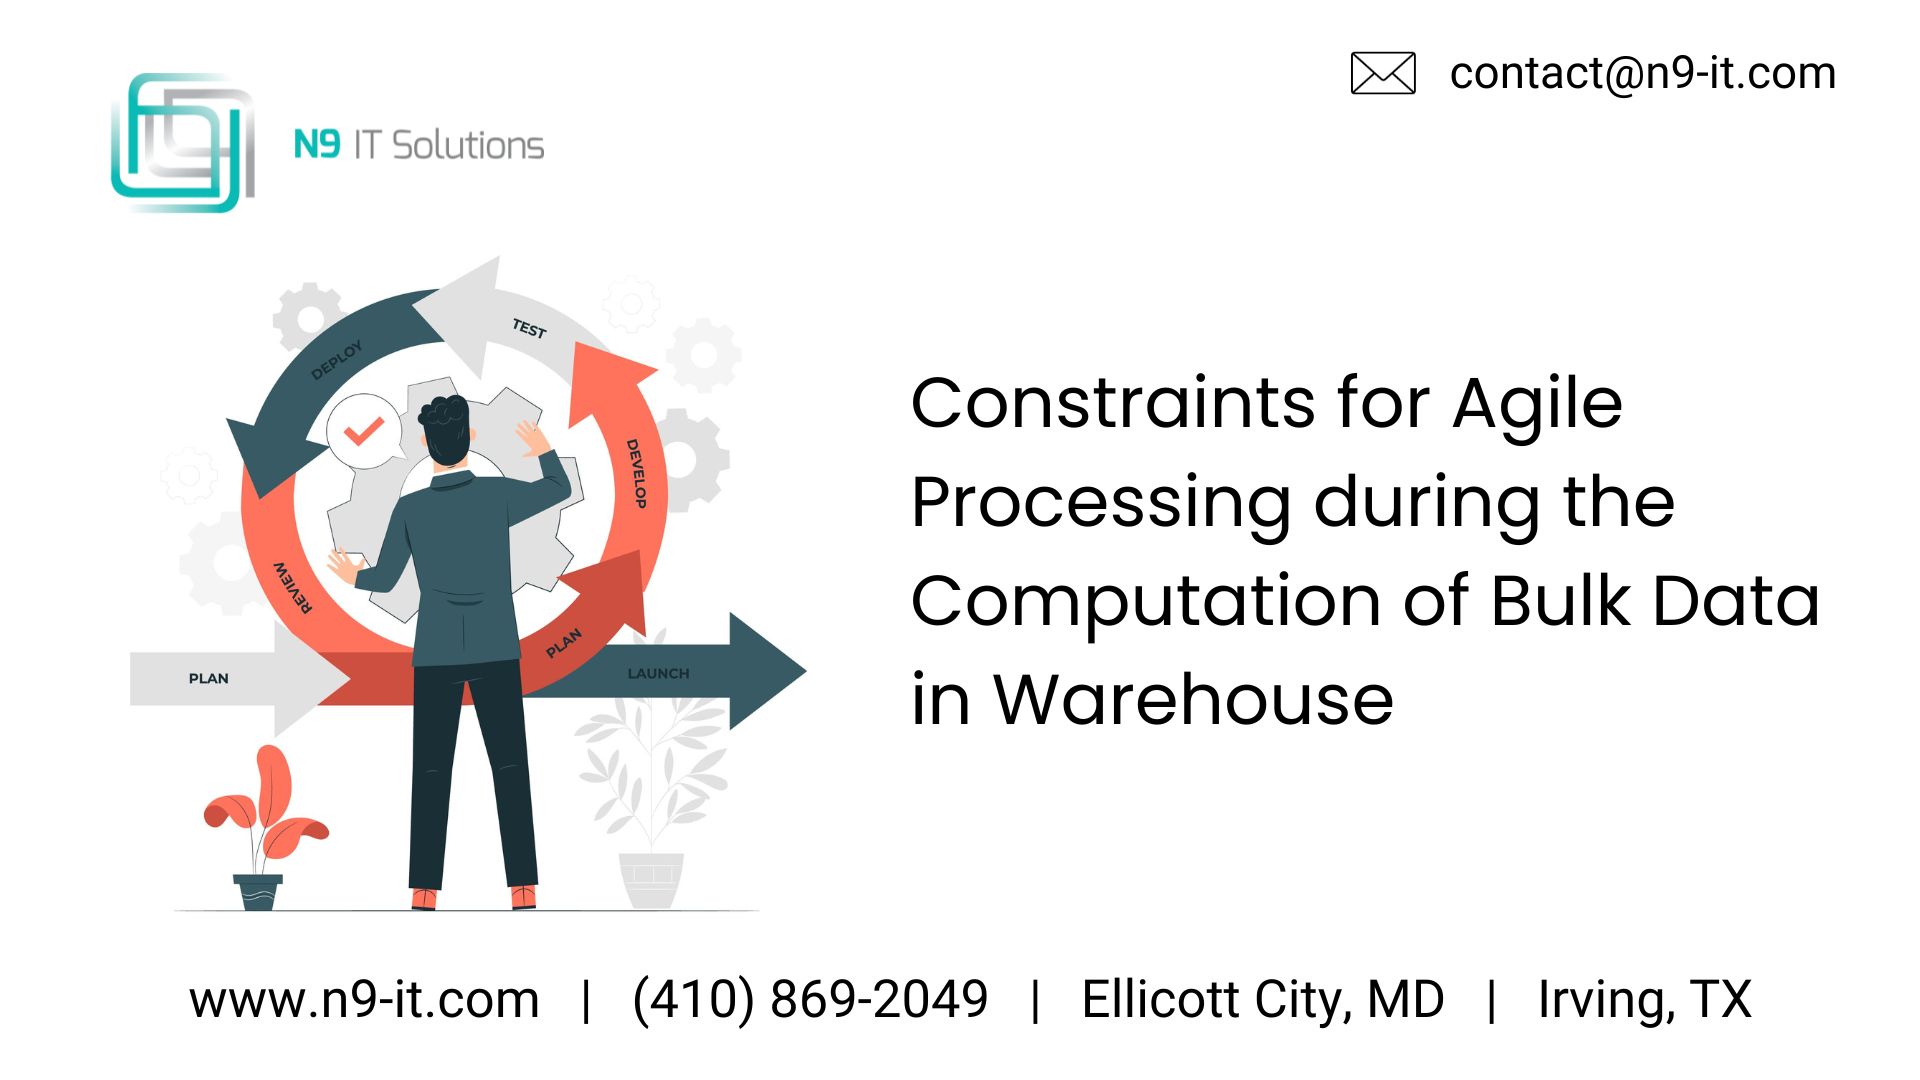 Constraints for Agile Processing during the Computation of Bulk Data in Warehouse